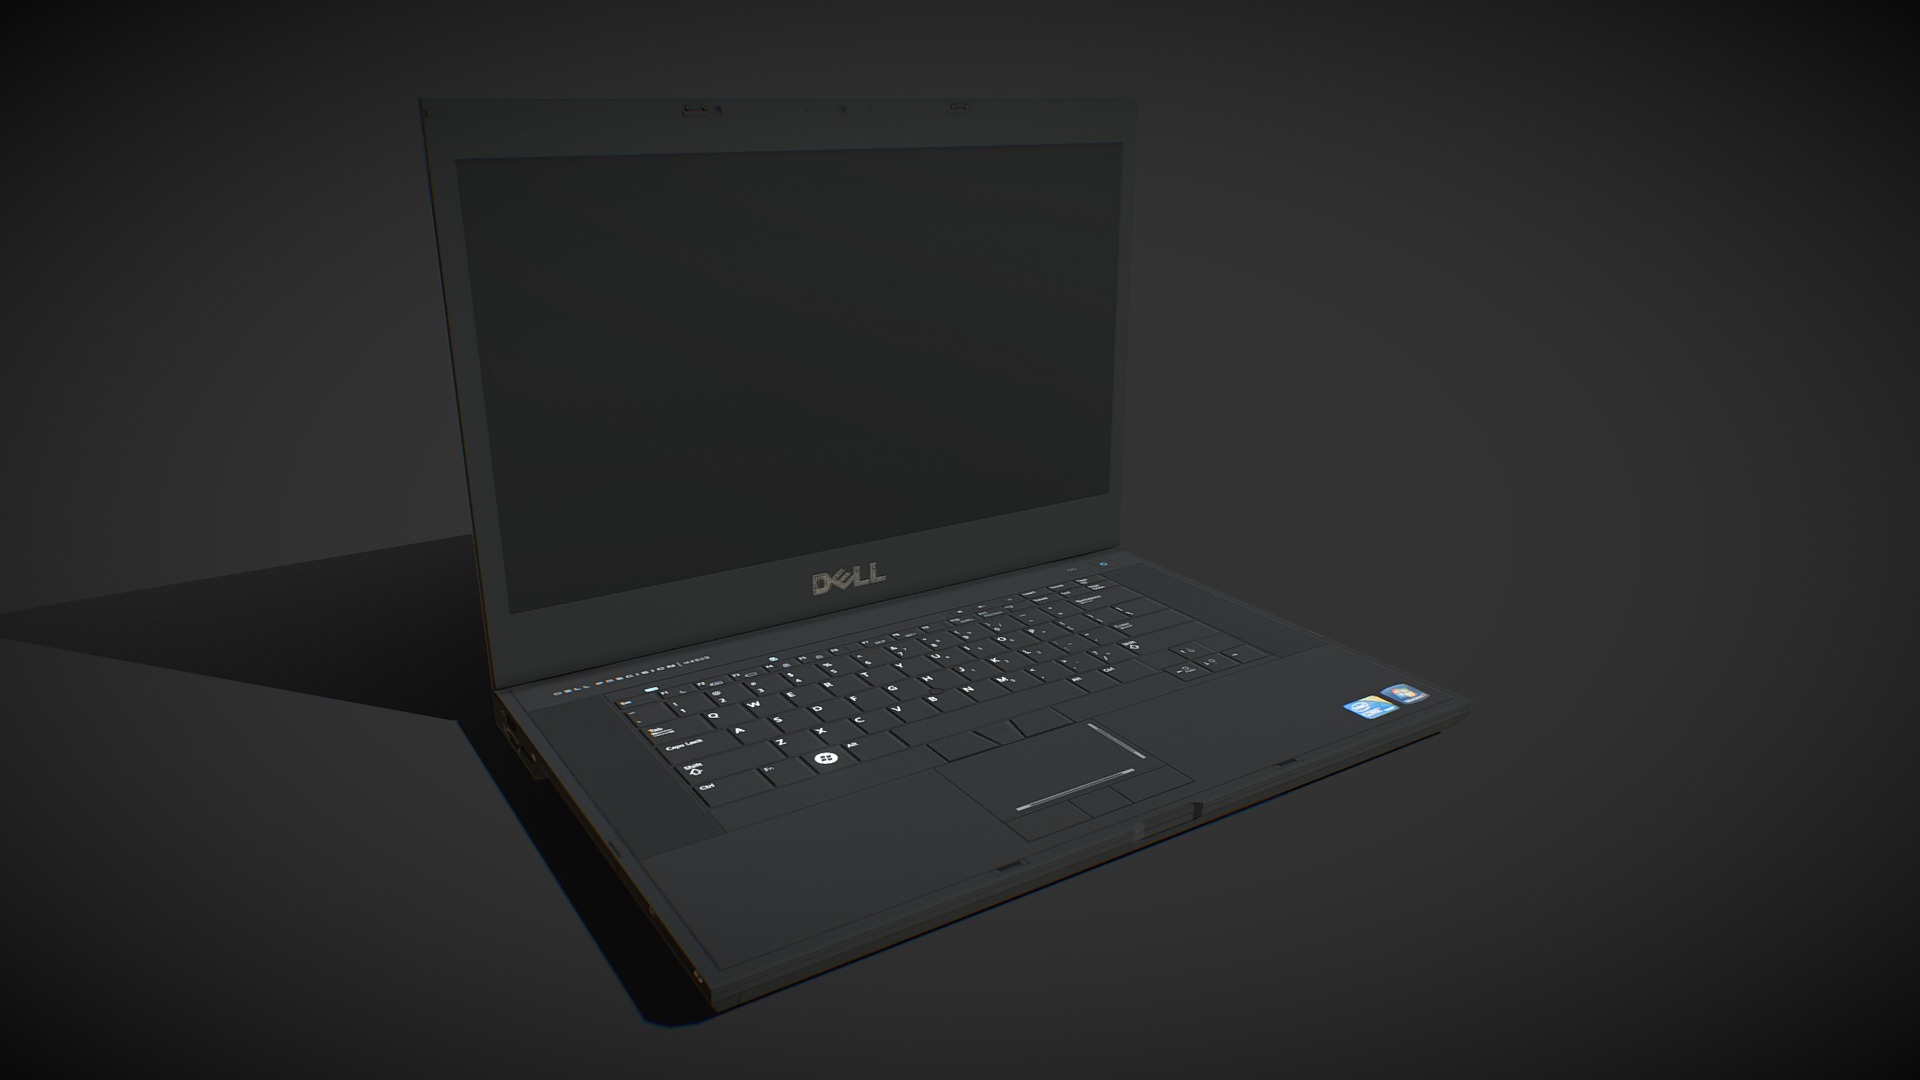 3D model Dell Precision Mobile Workstation M4500 LowPoly - This is a 3D model of the Dell Precision Mobile Workstation M4500 LowPoly. The 3D model is about a laptop on a table.